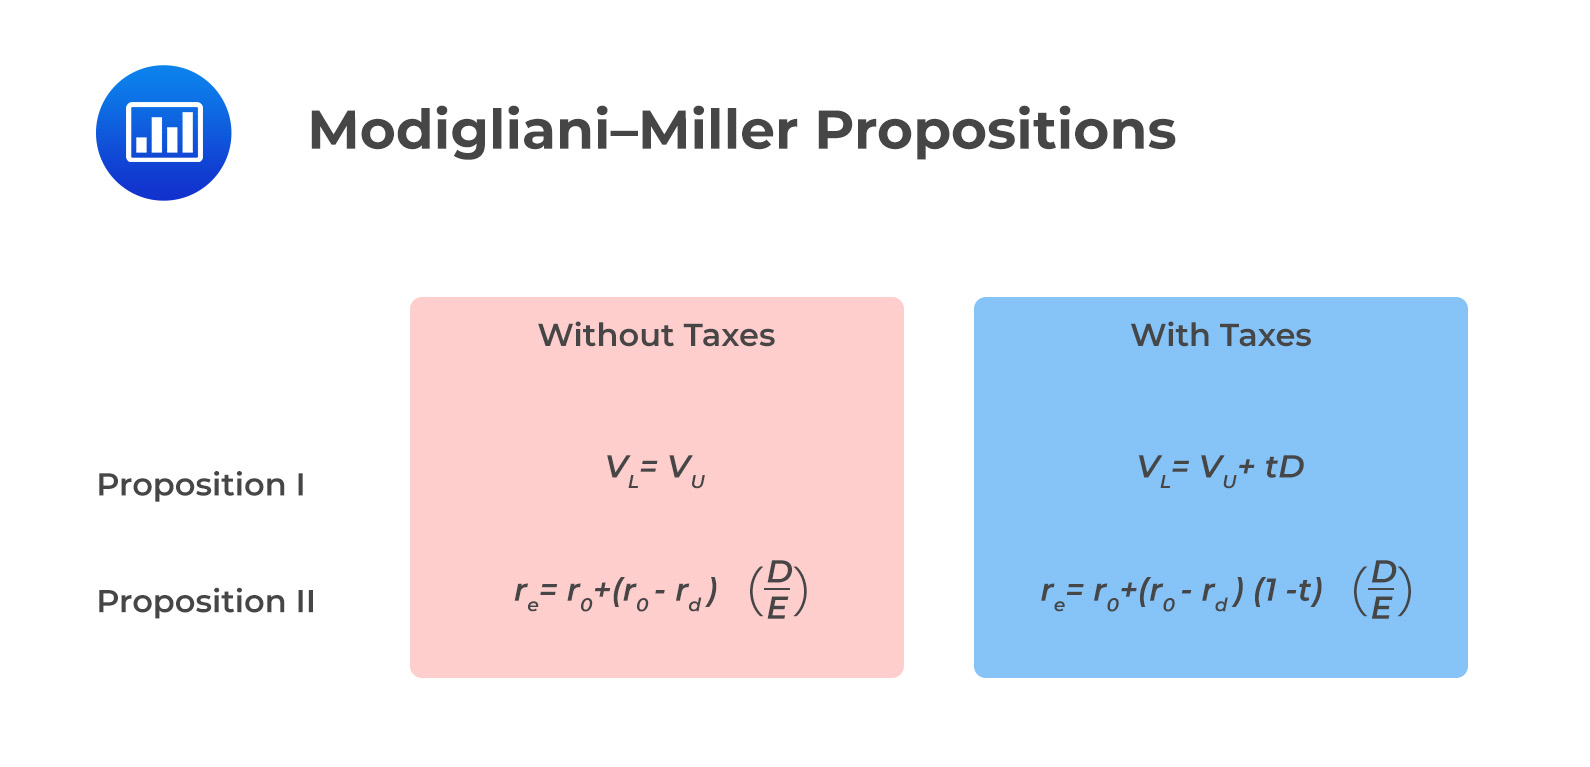 What Is the Modigliani-Miller (M&M) Theorem, and How Is It Used?